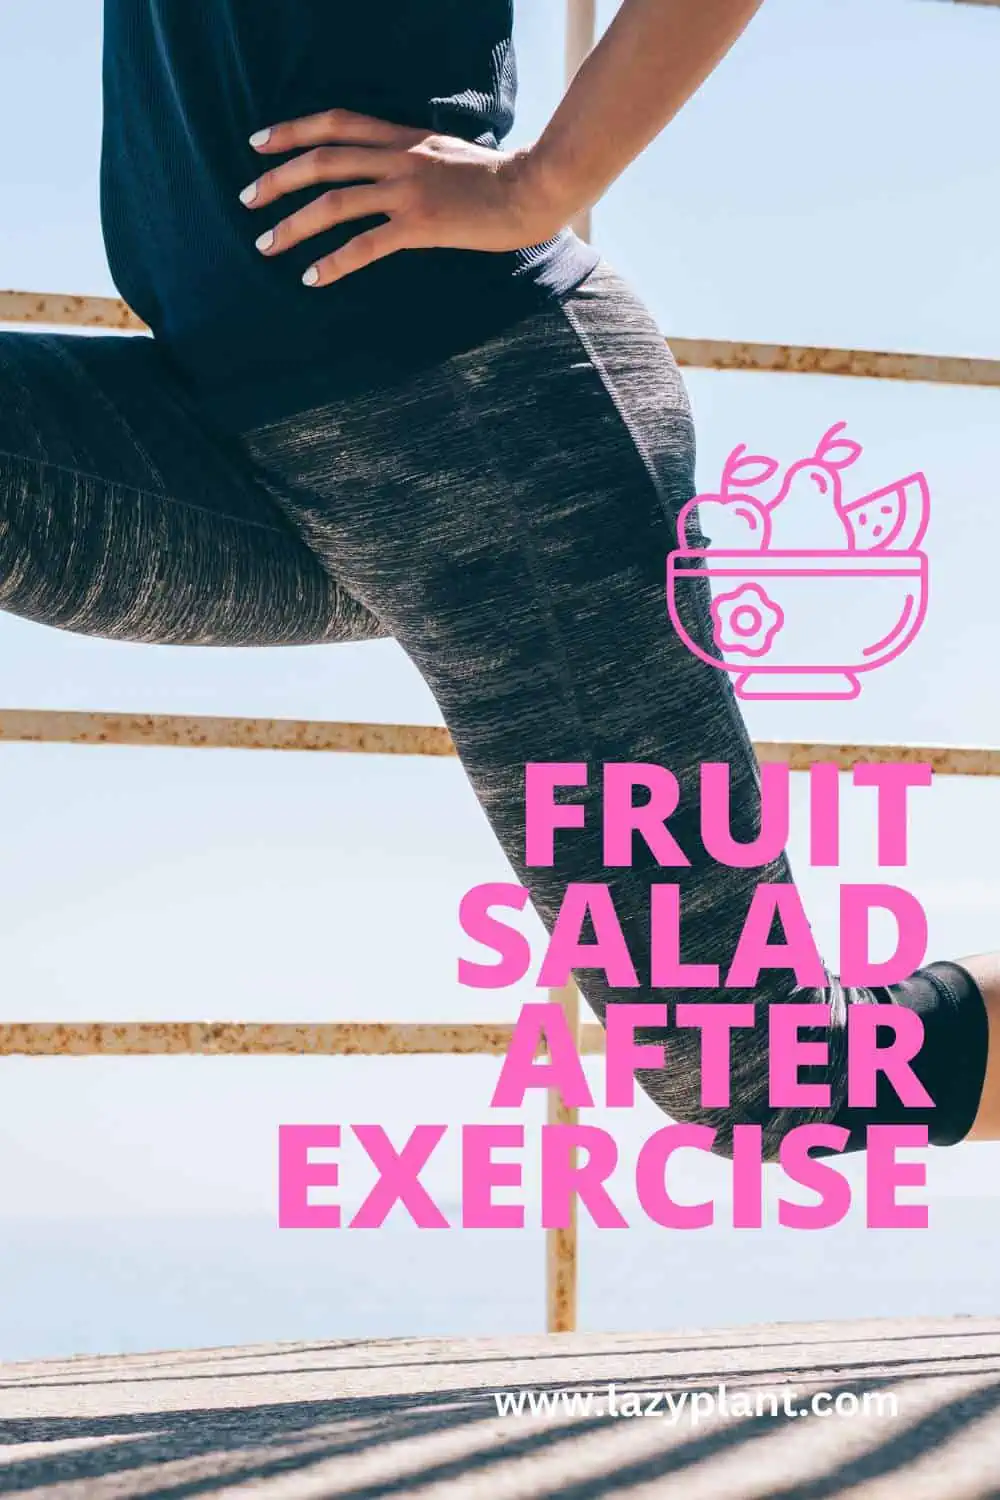 Why should athletes eat a cup of fruit salad after a workout?